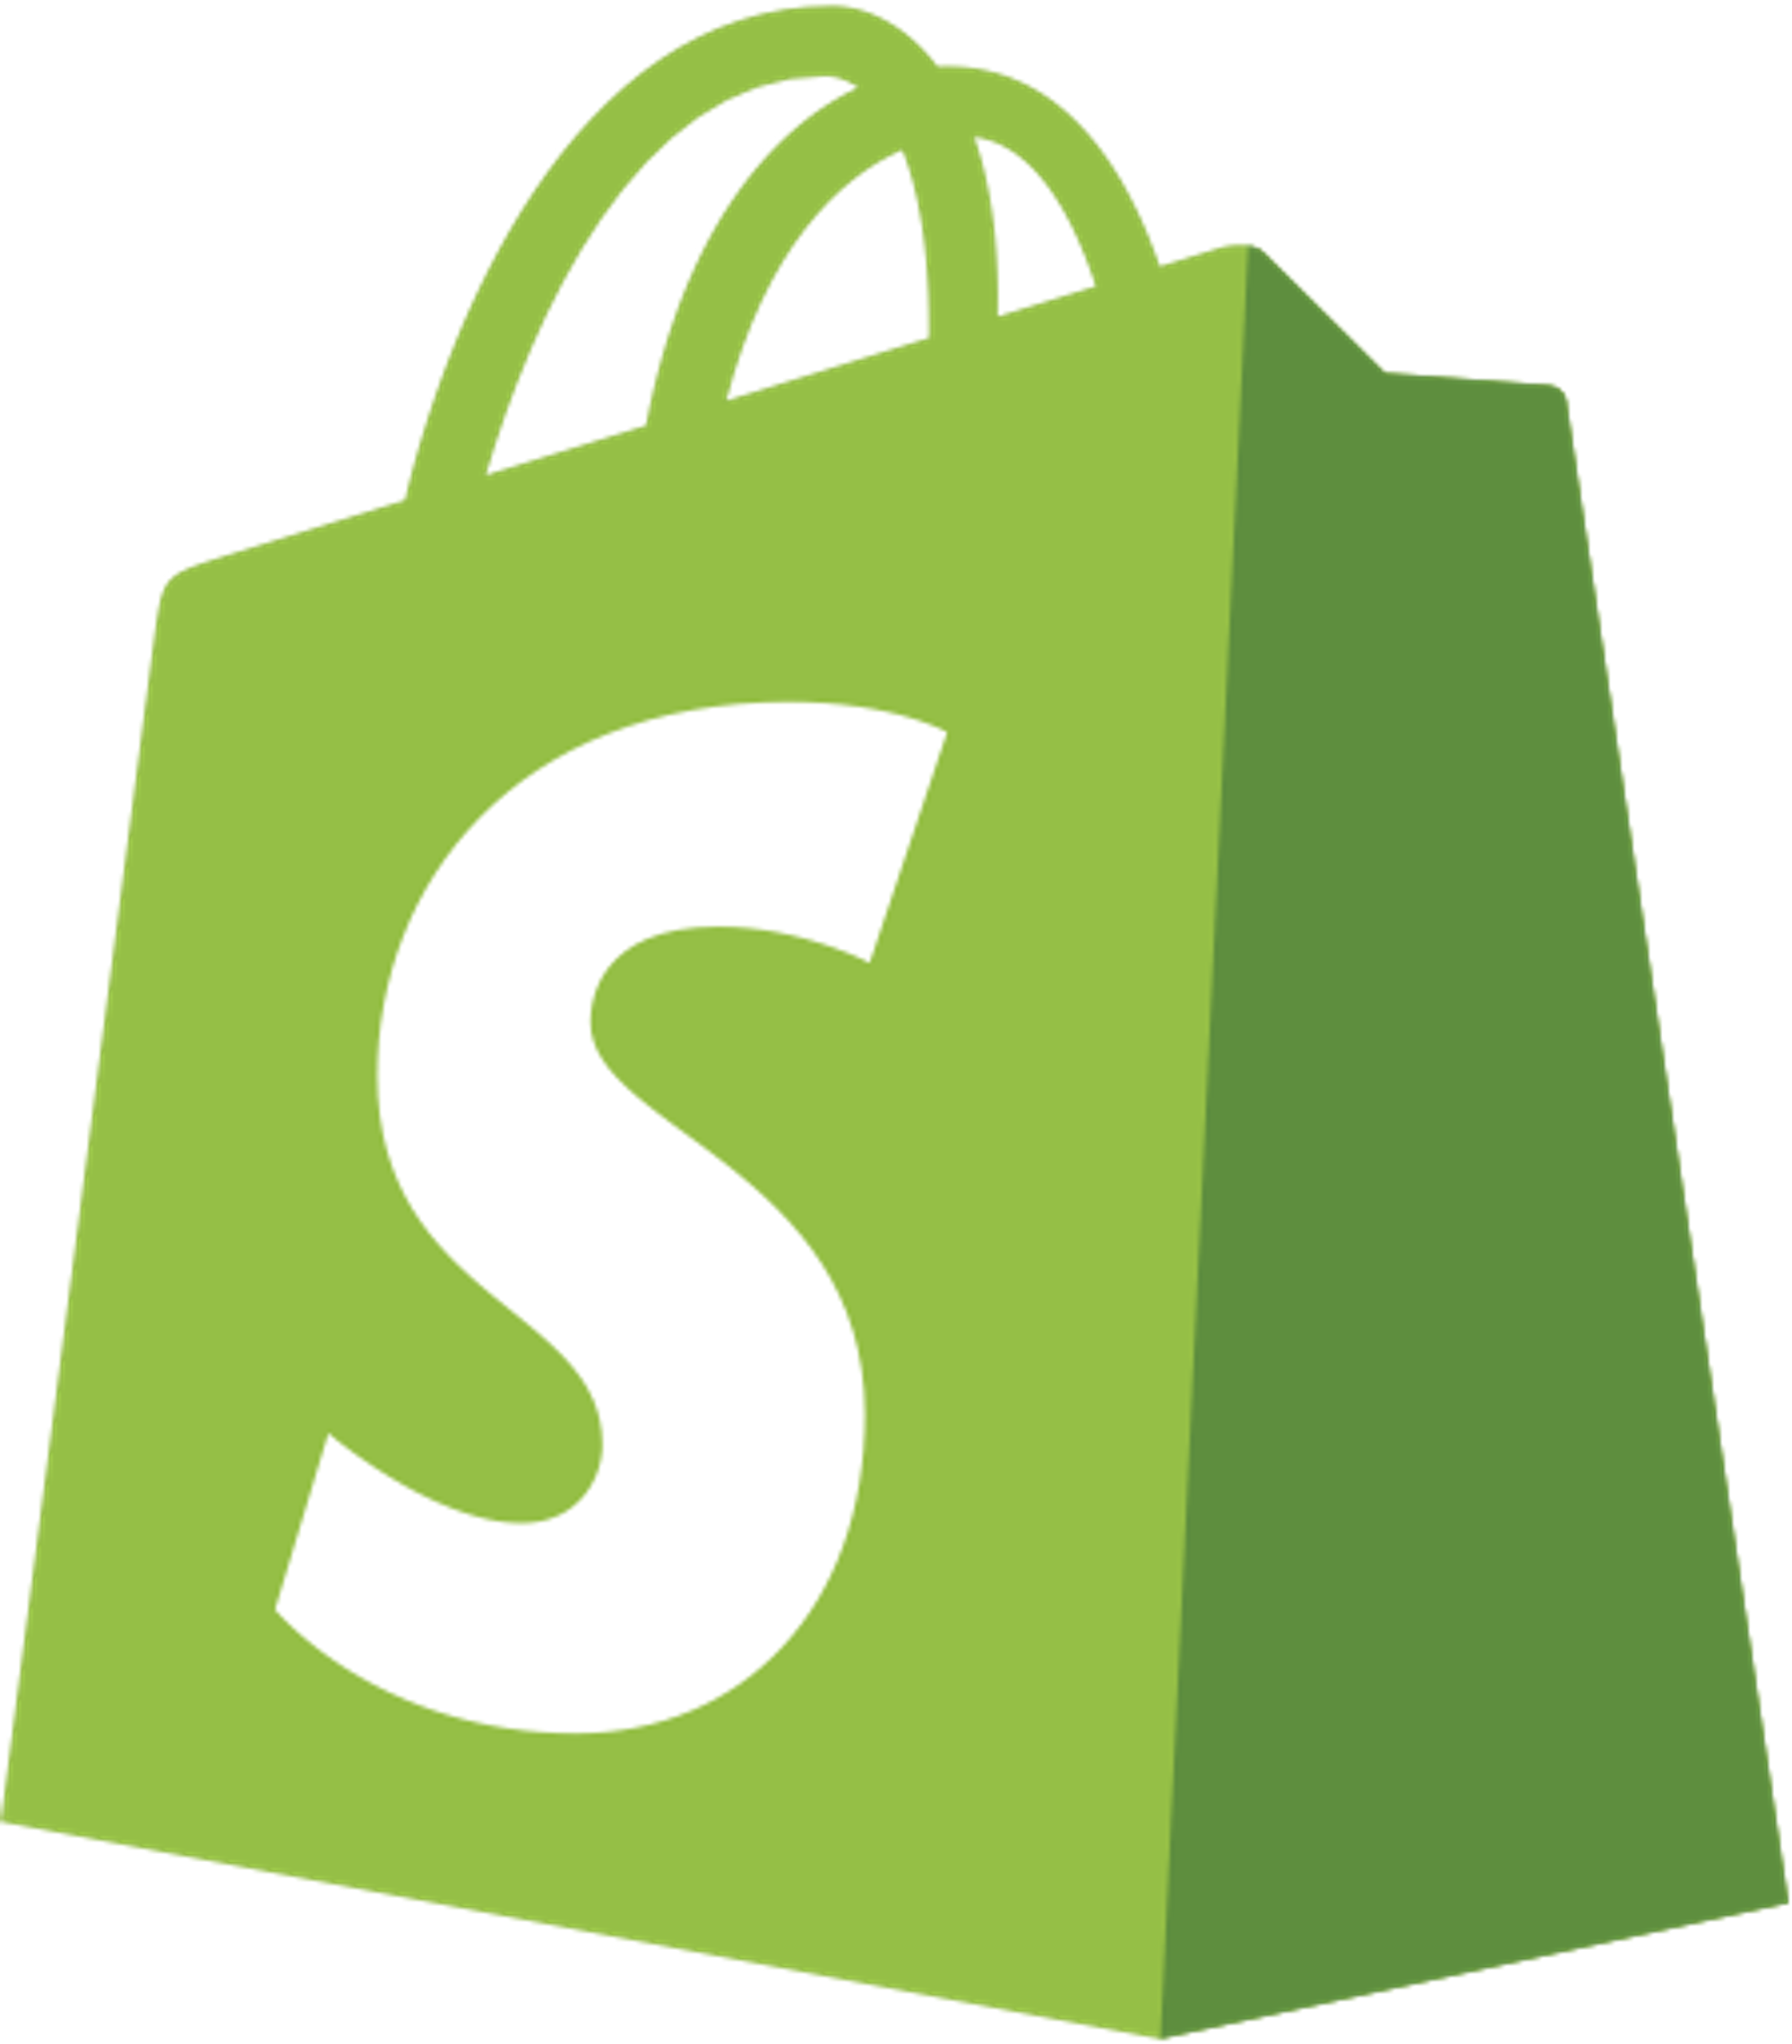 How to add ChatGPT to Shopify